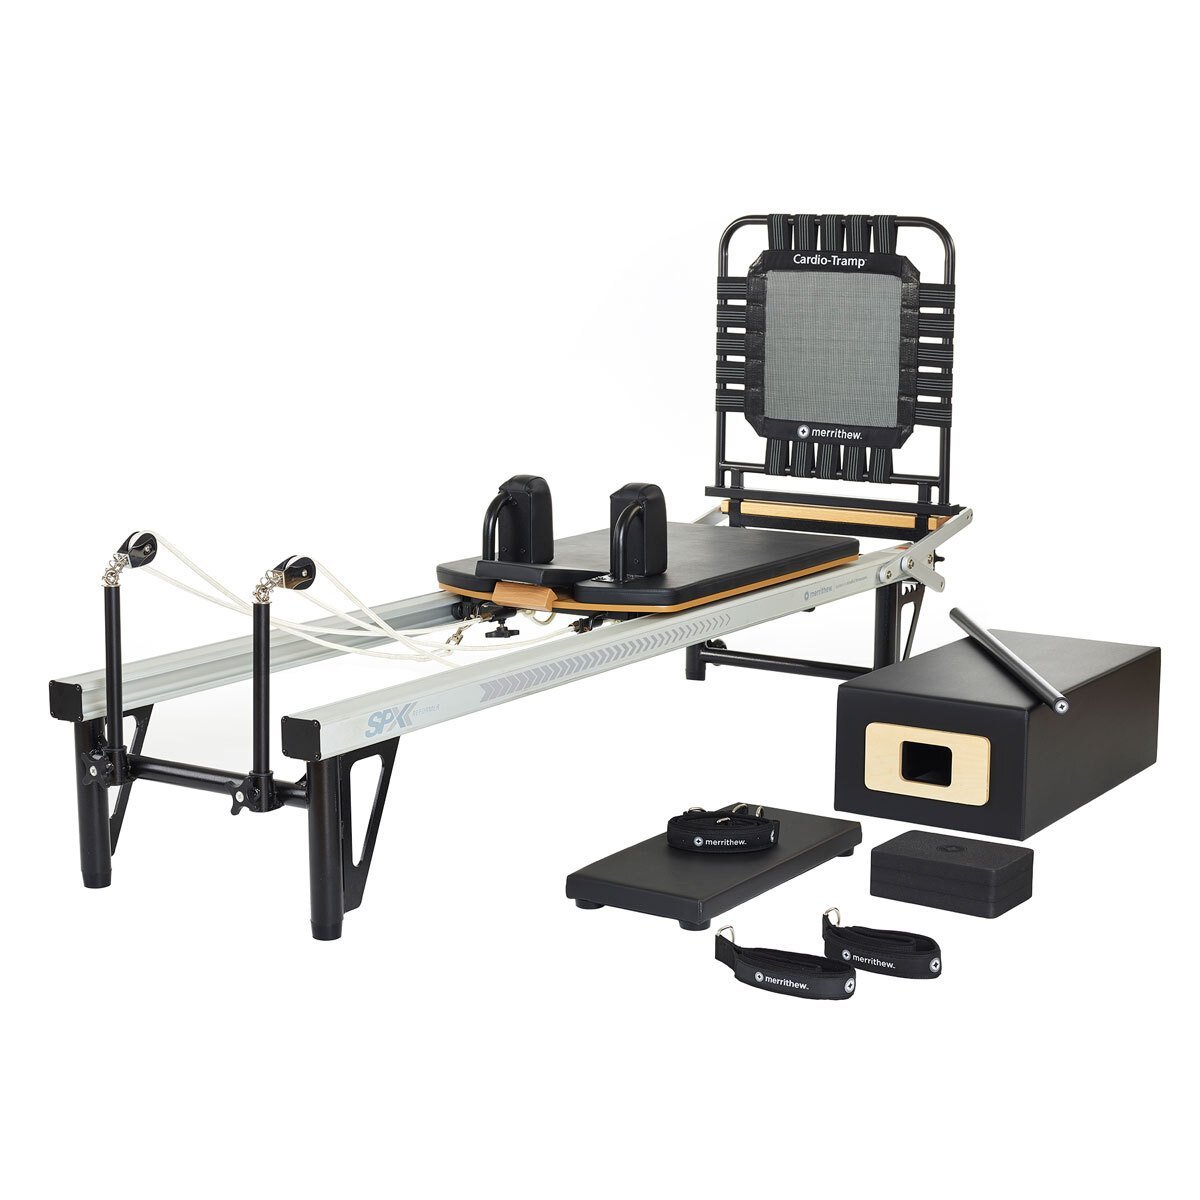 Elevated At Home SPX® Reformer Cardio Package with Digital Workouts by Merrithew™/STOTT PILATES® - Signature Retail Stores